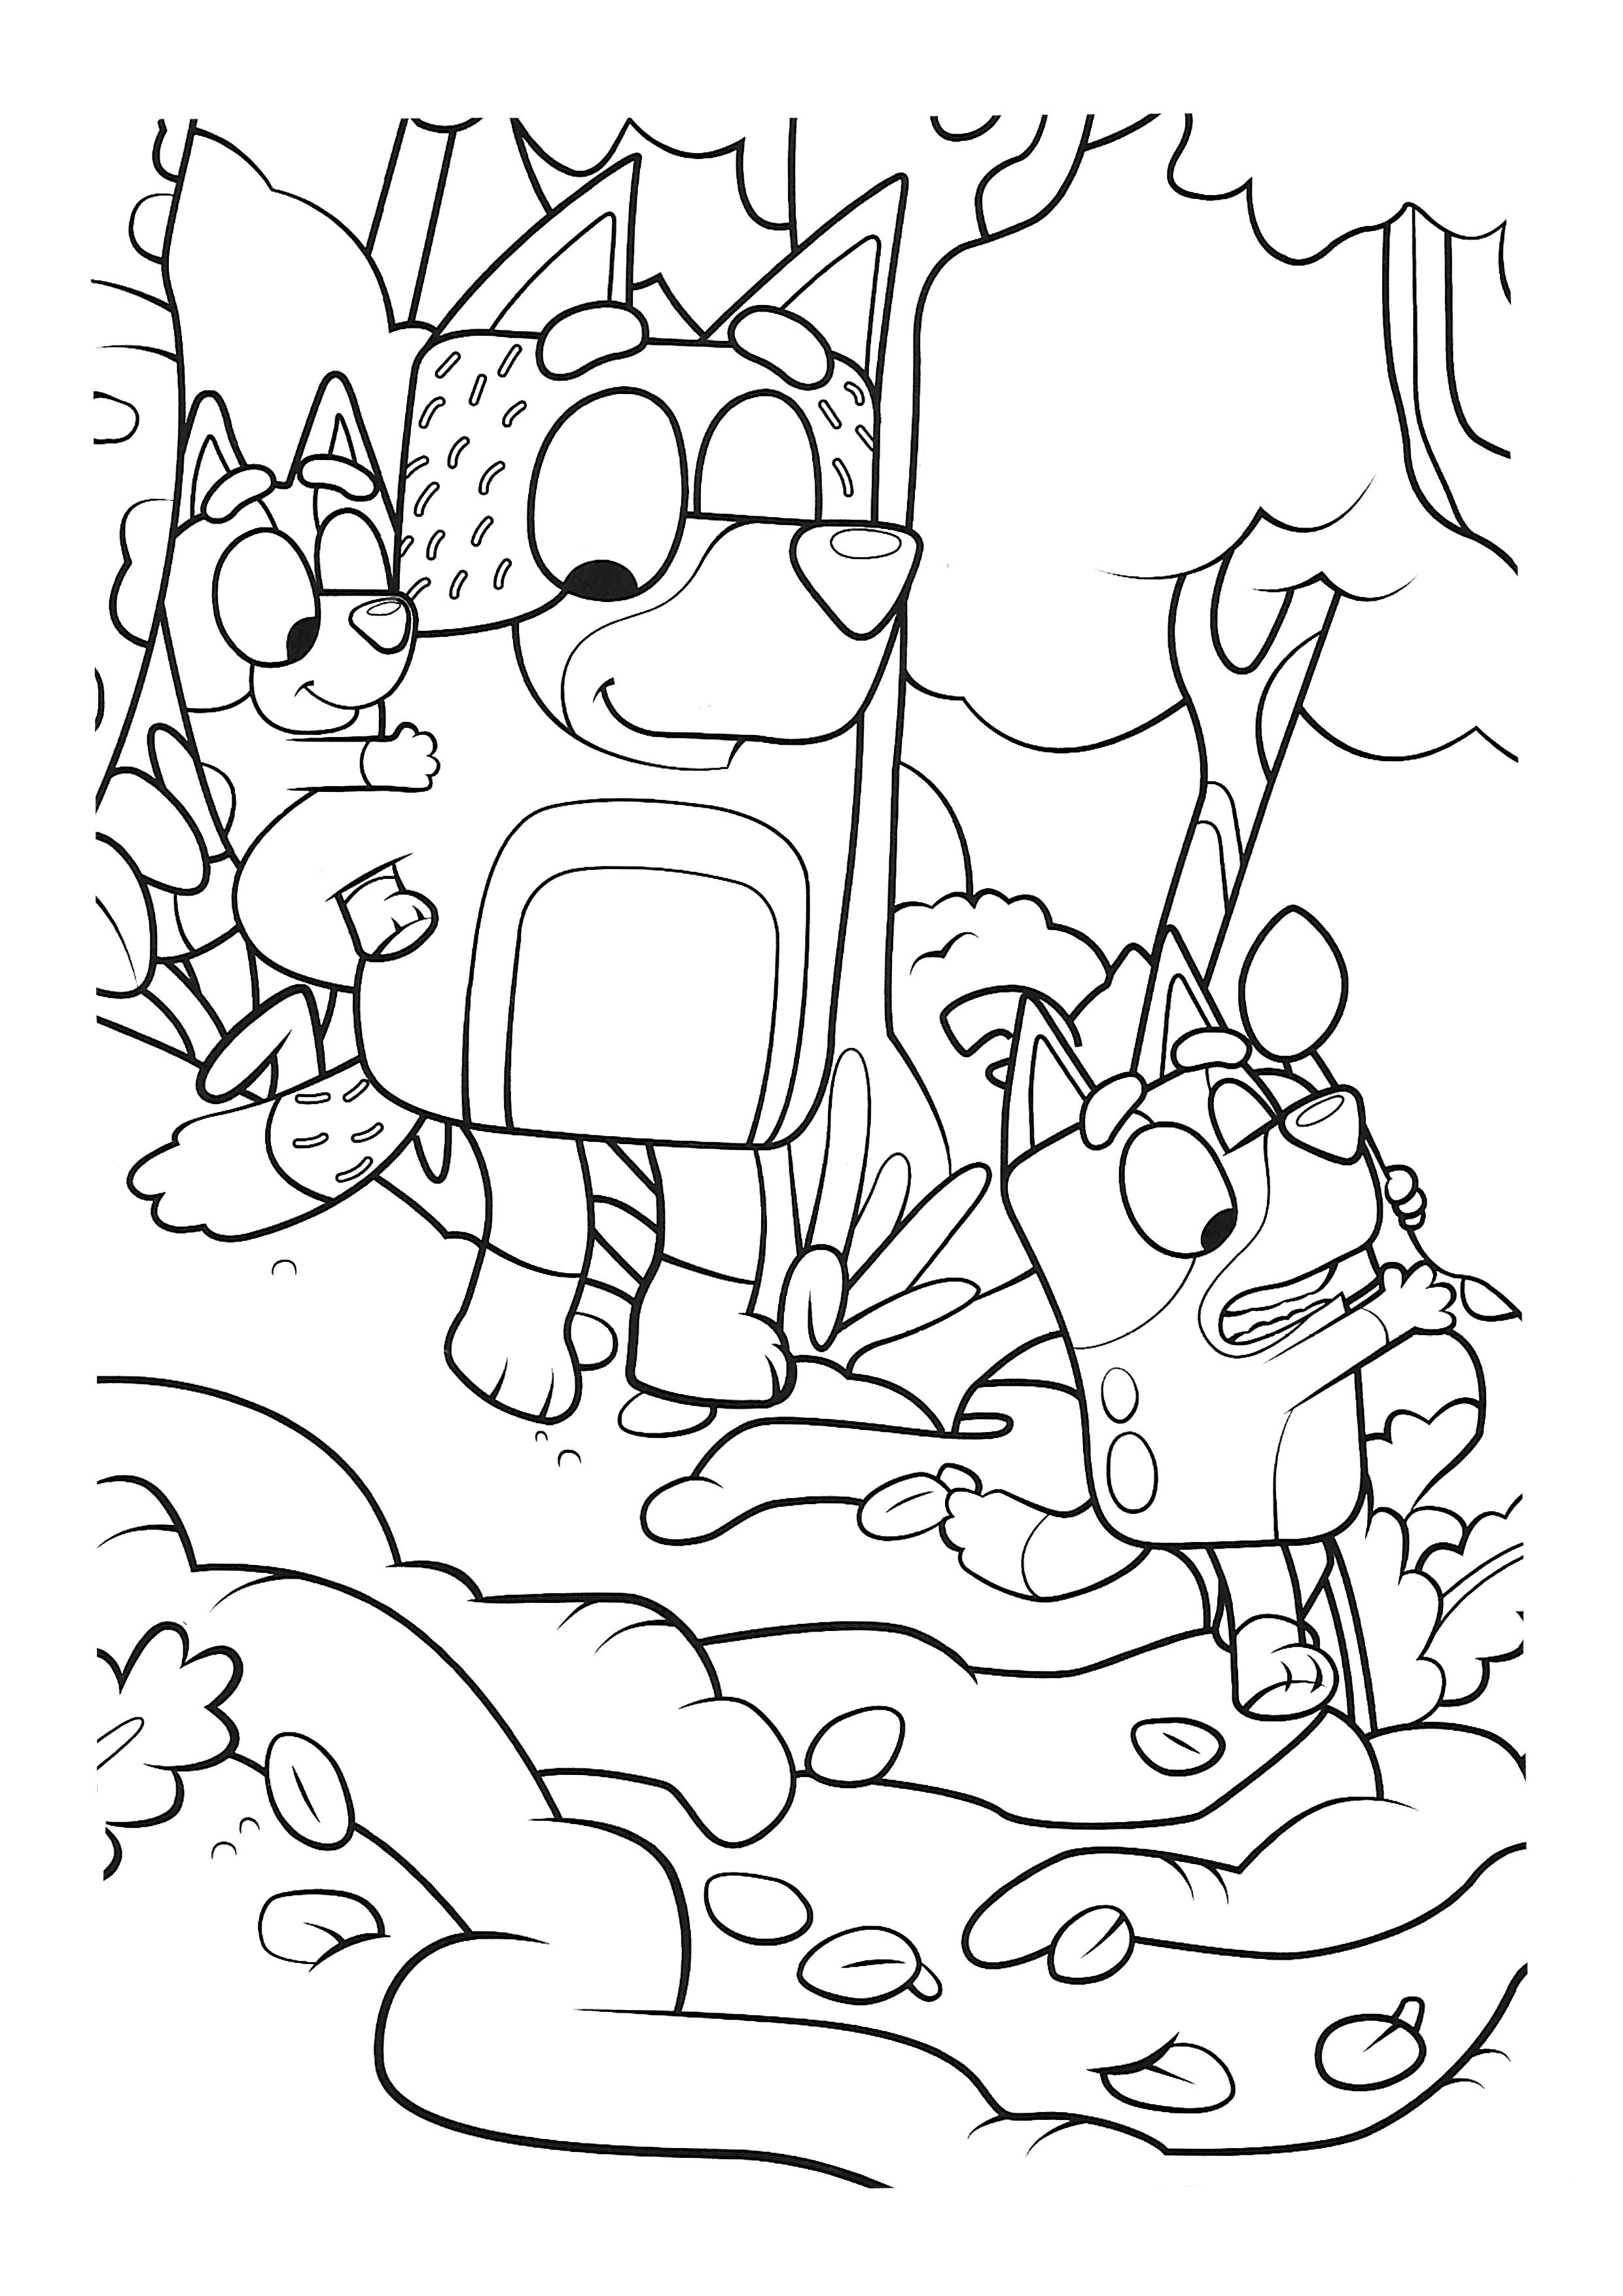 Disney coloring pages, Coloring book art